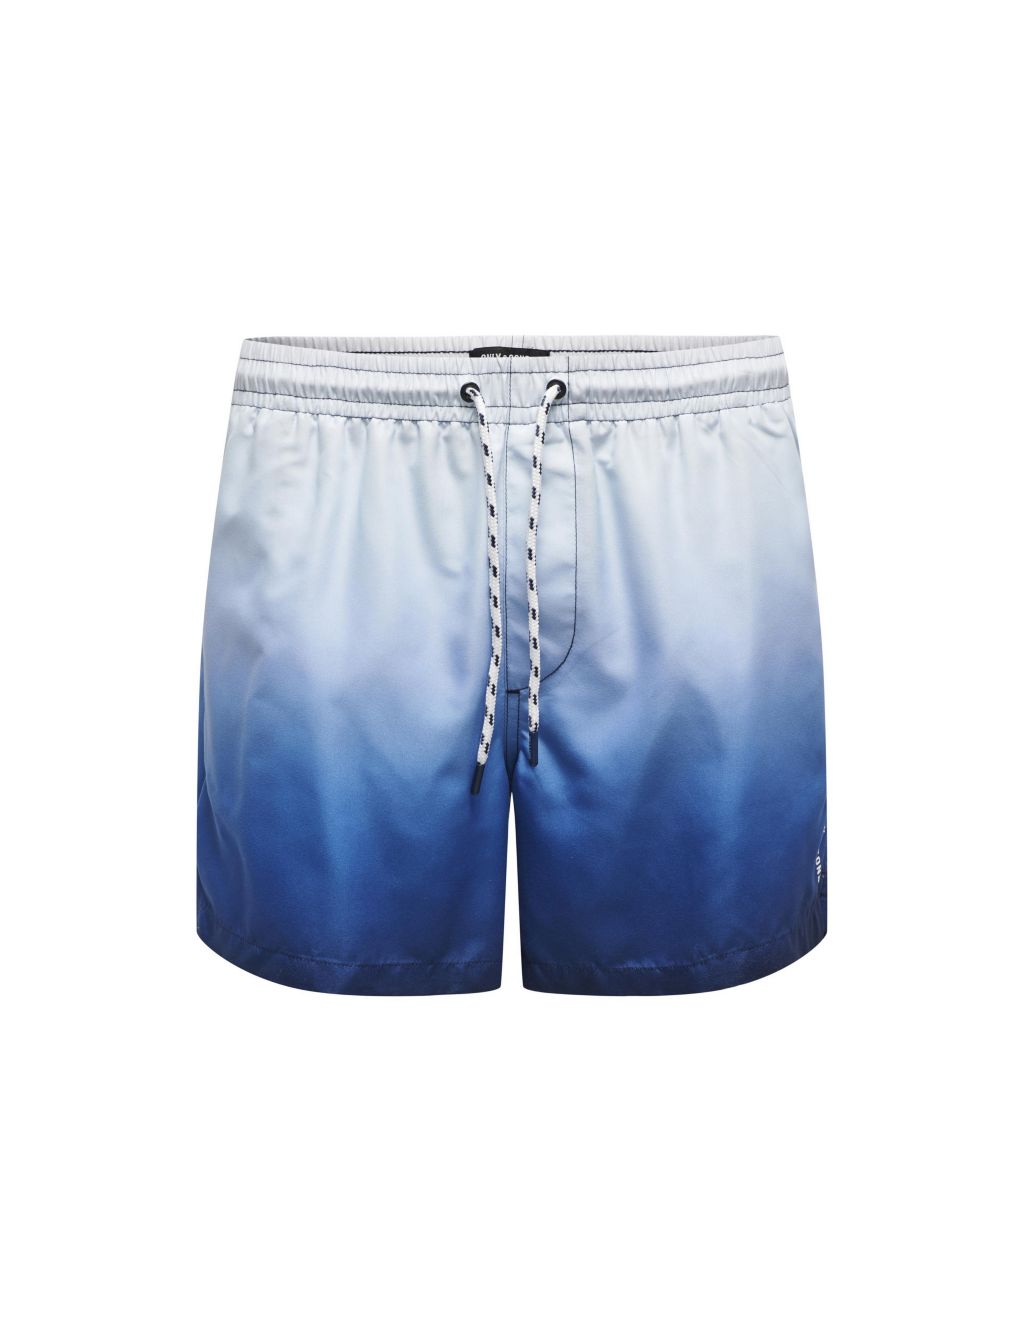 Pocketed Ombre Swim Shorts 1 of 2